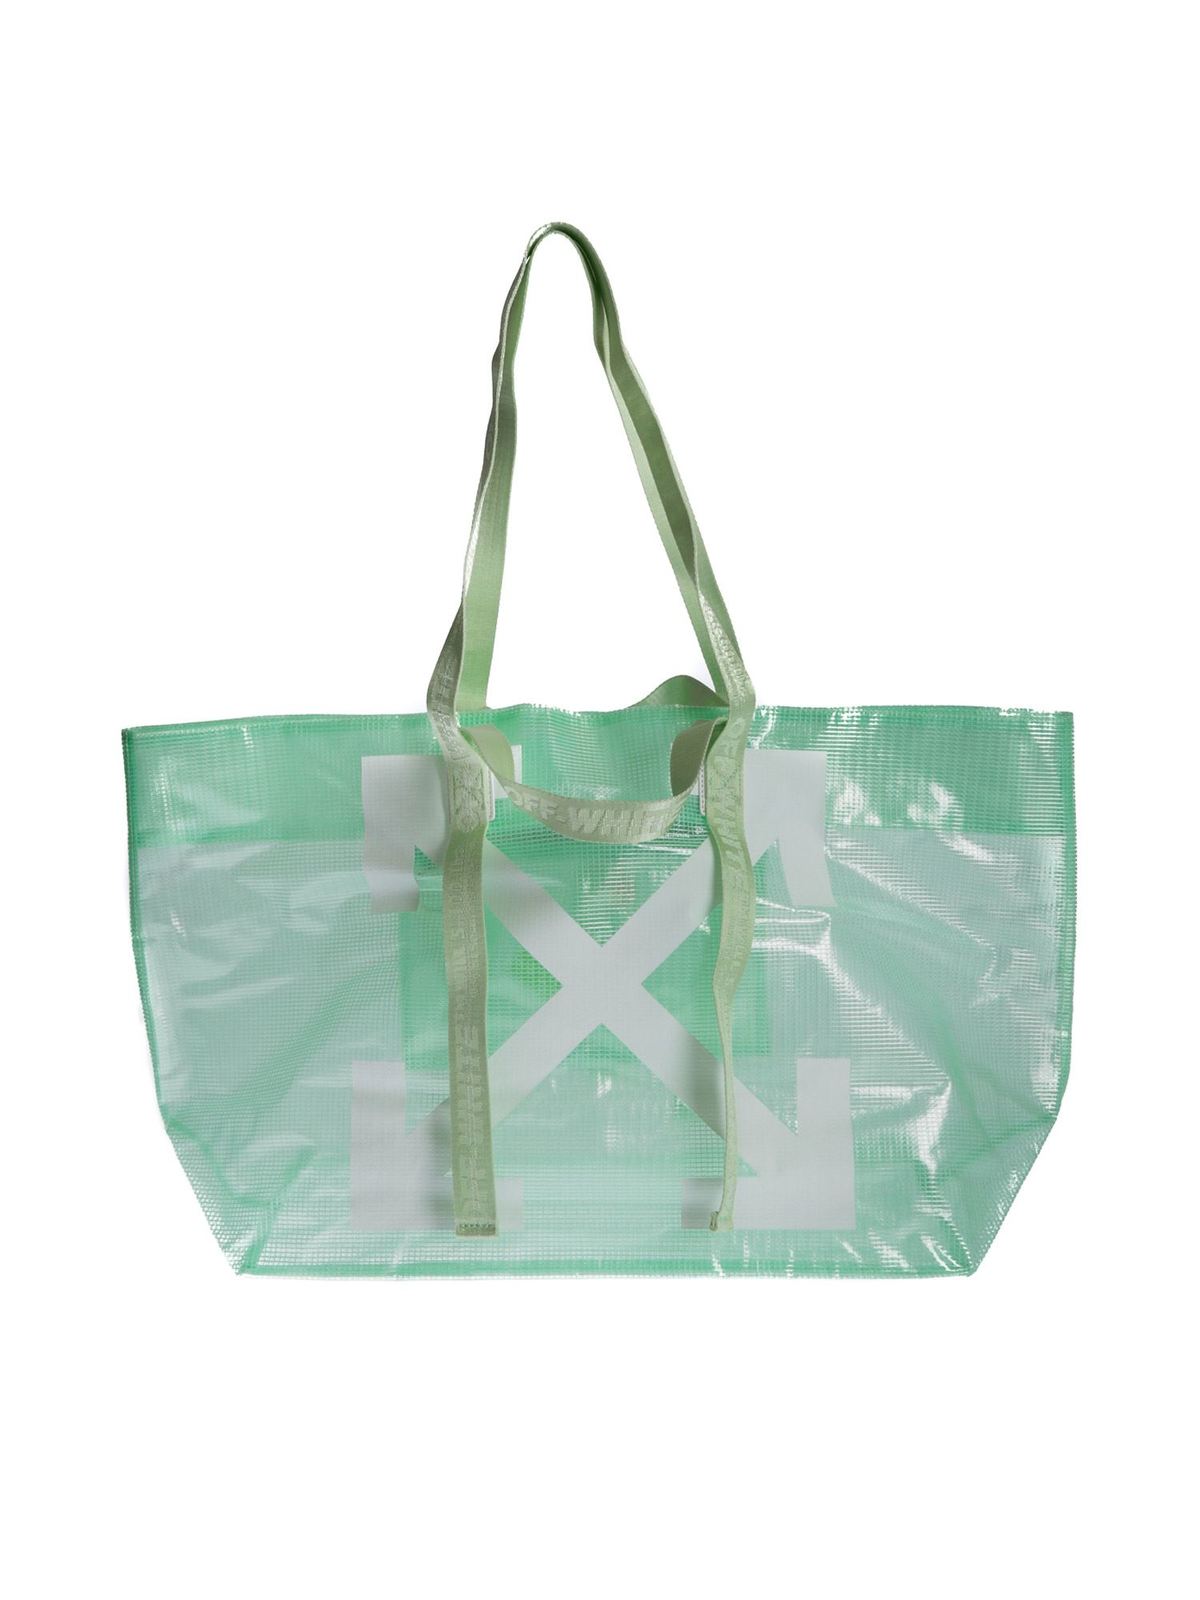 OFF-WHITE ARROWS TOTE IN LIGHT GREEN AND WHITE